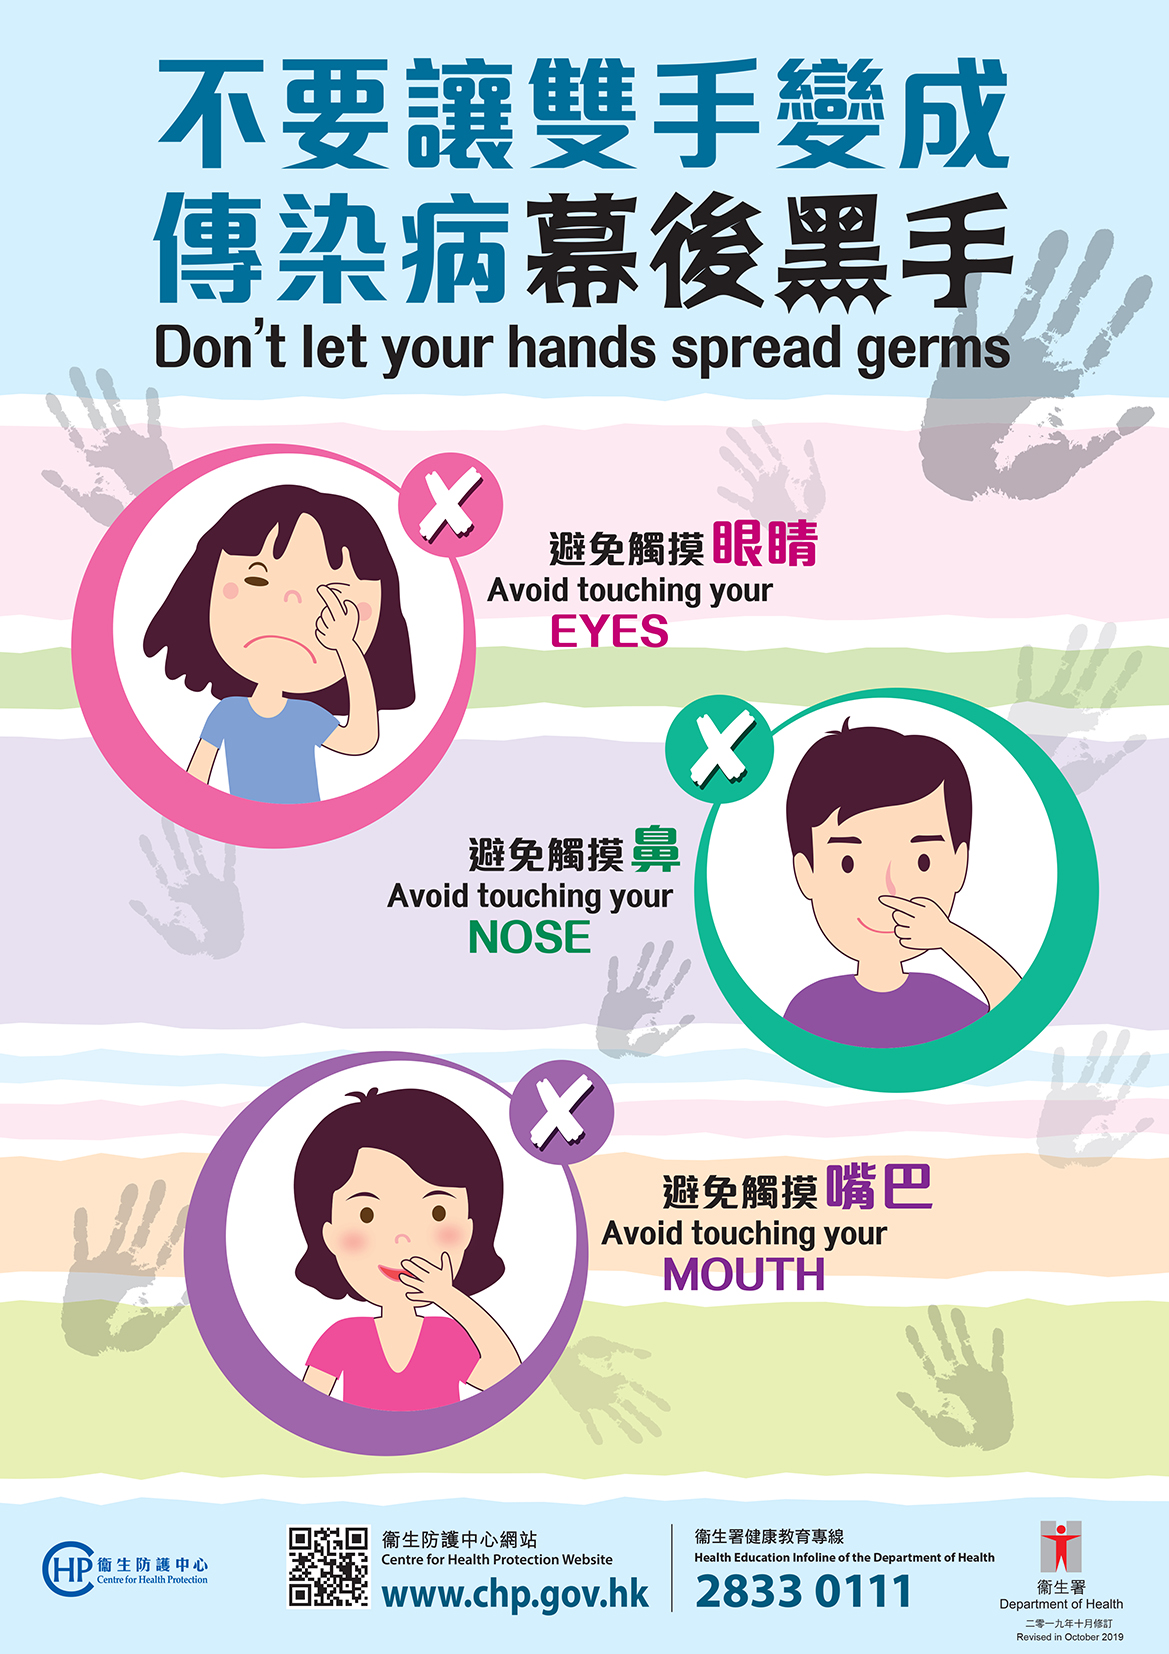 Don't let your hands spread germs